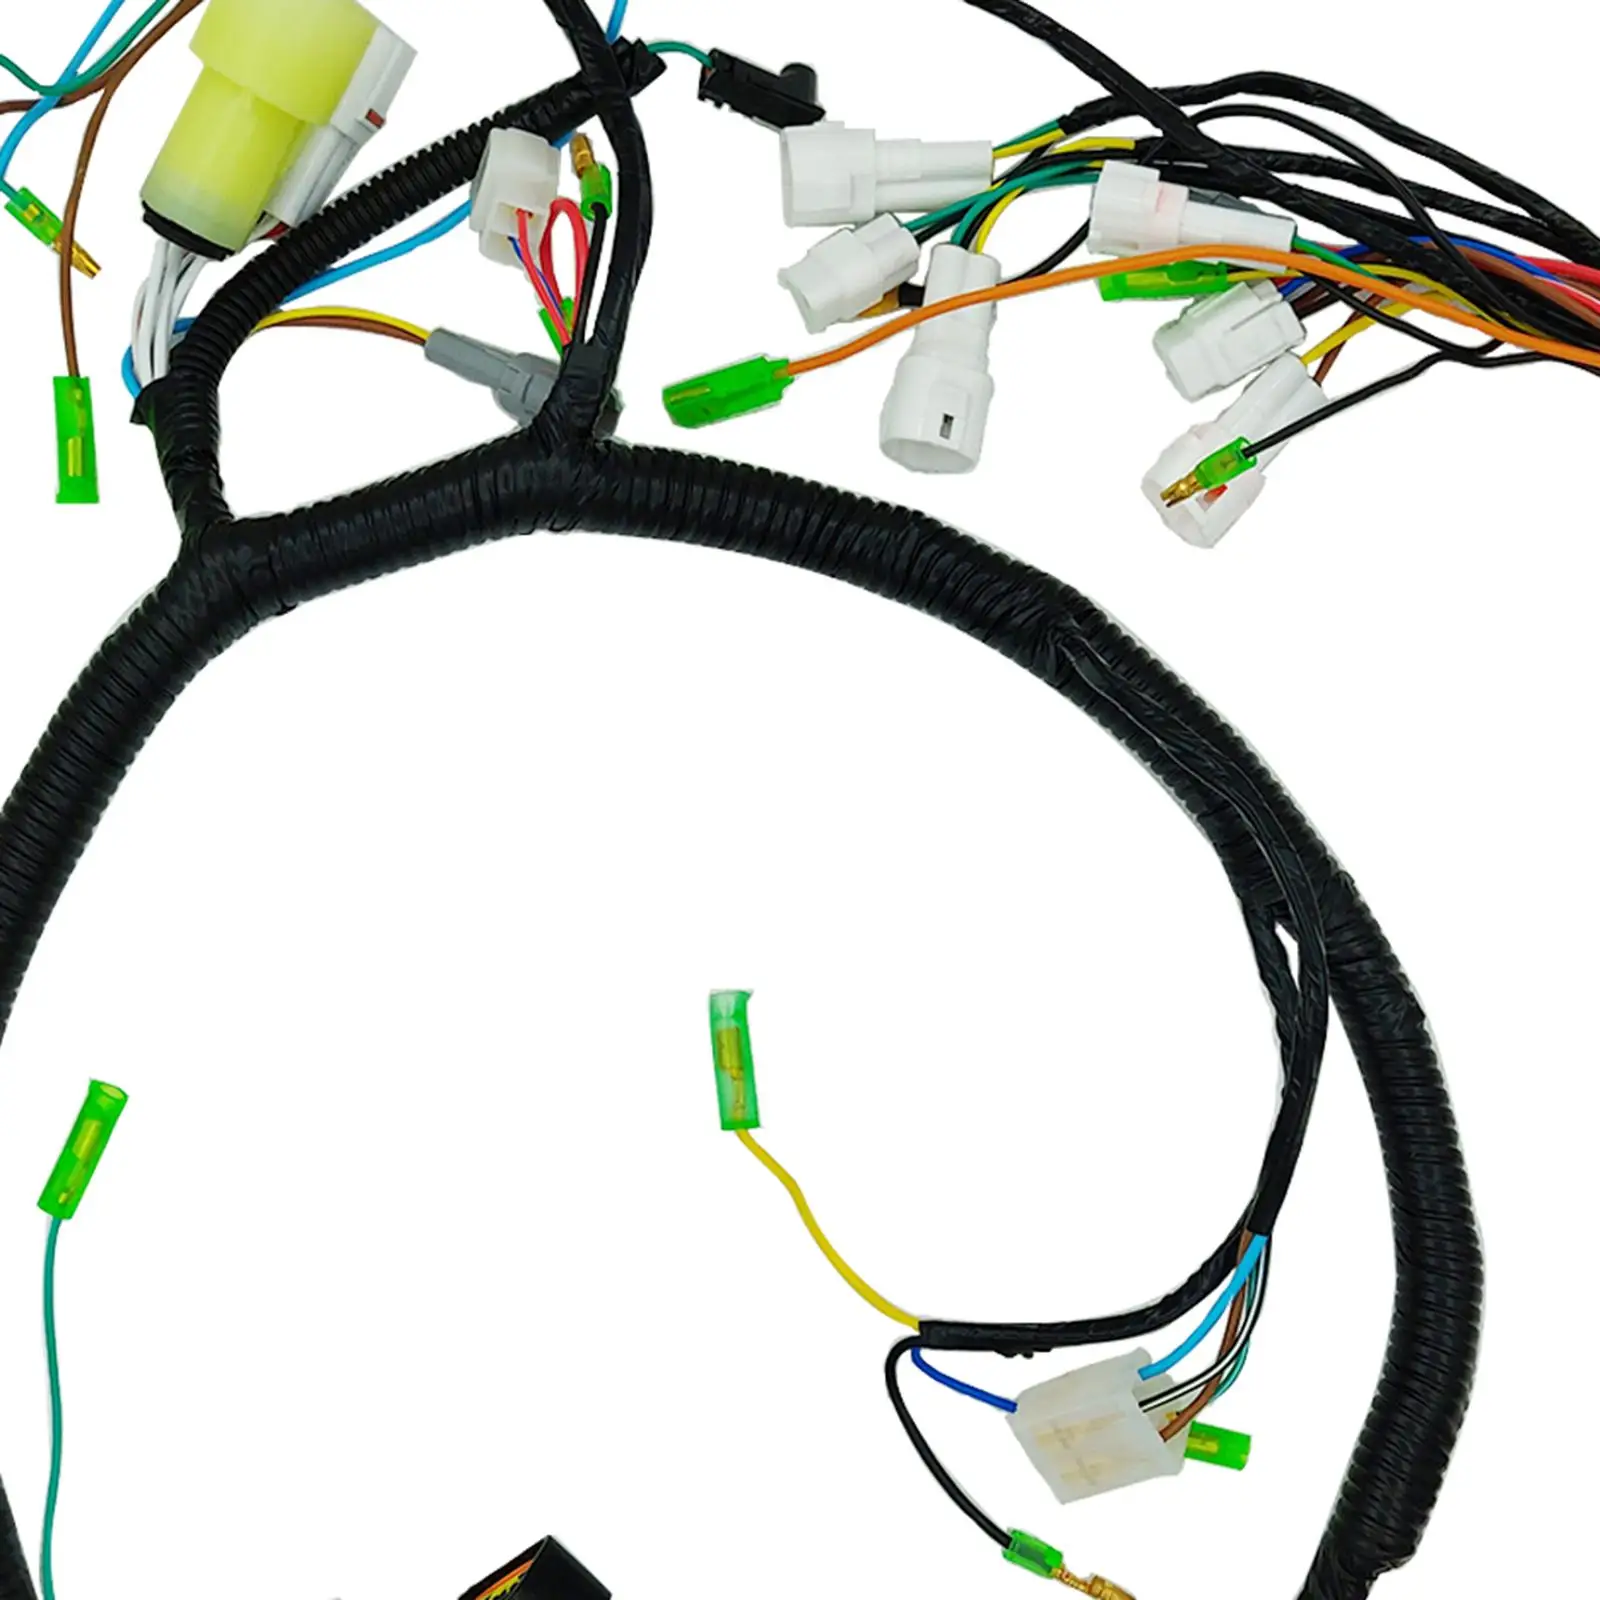 New Wire Harness Assembly  Replacement Fit 50 Yfm350x 2002-2004 Advanced manufacturing technology